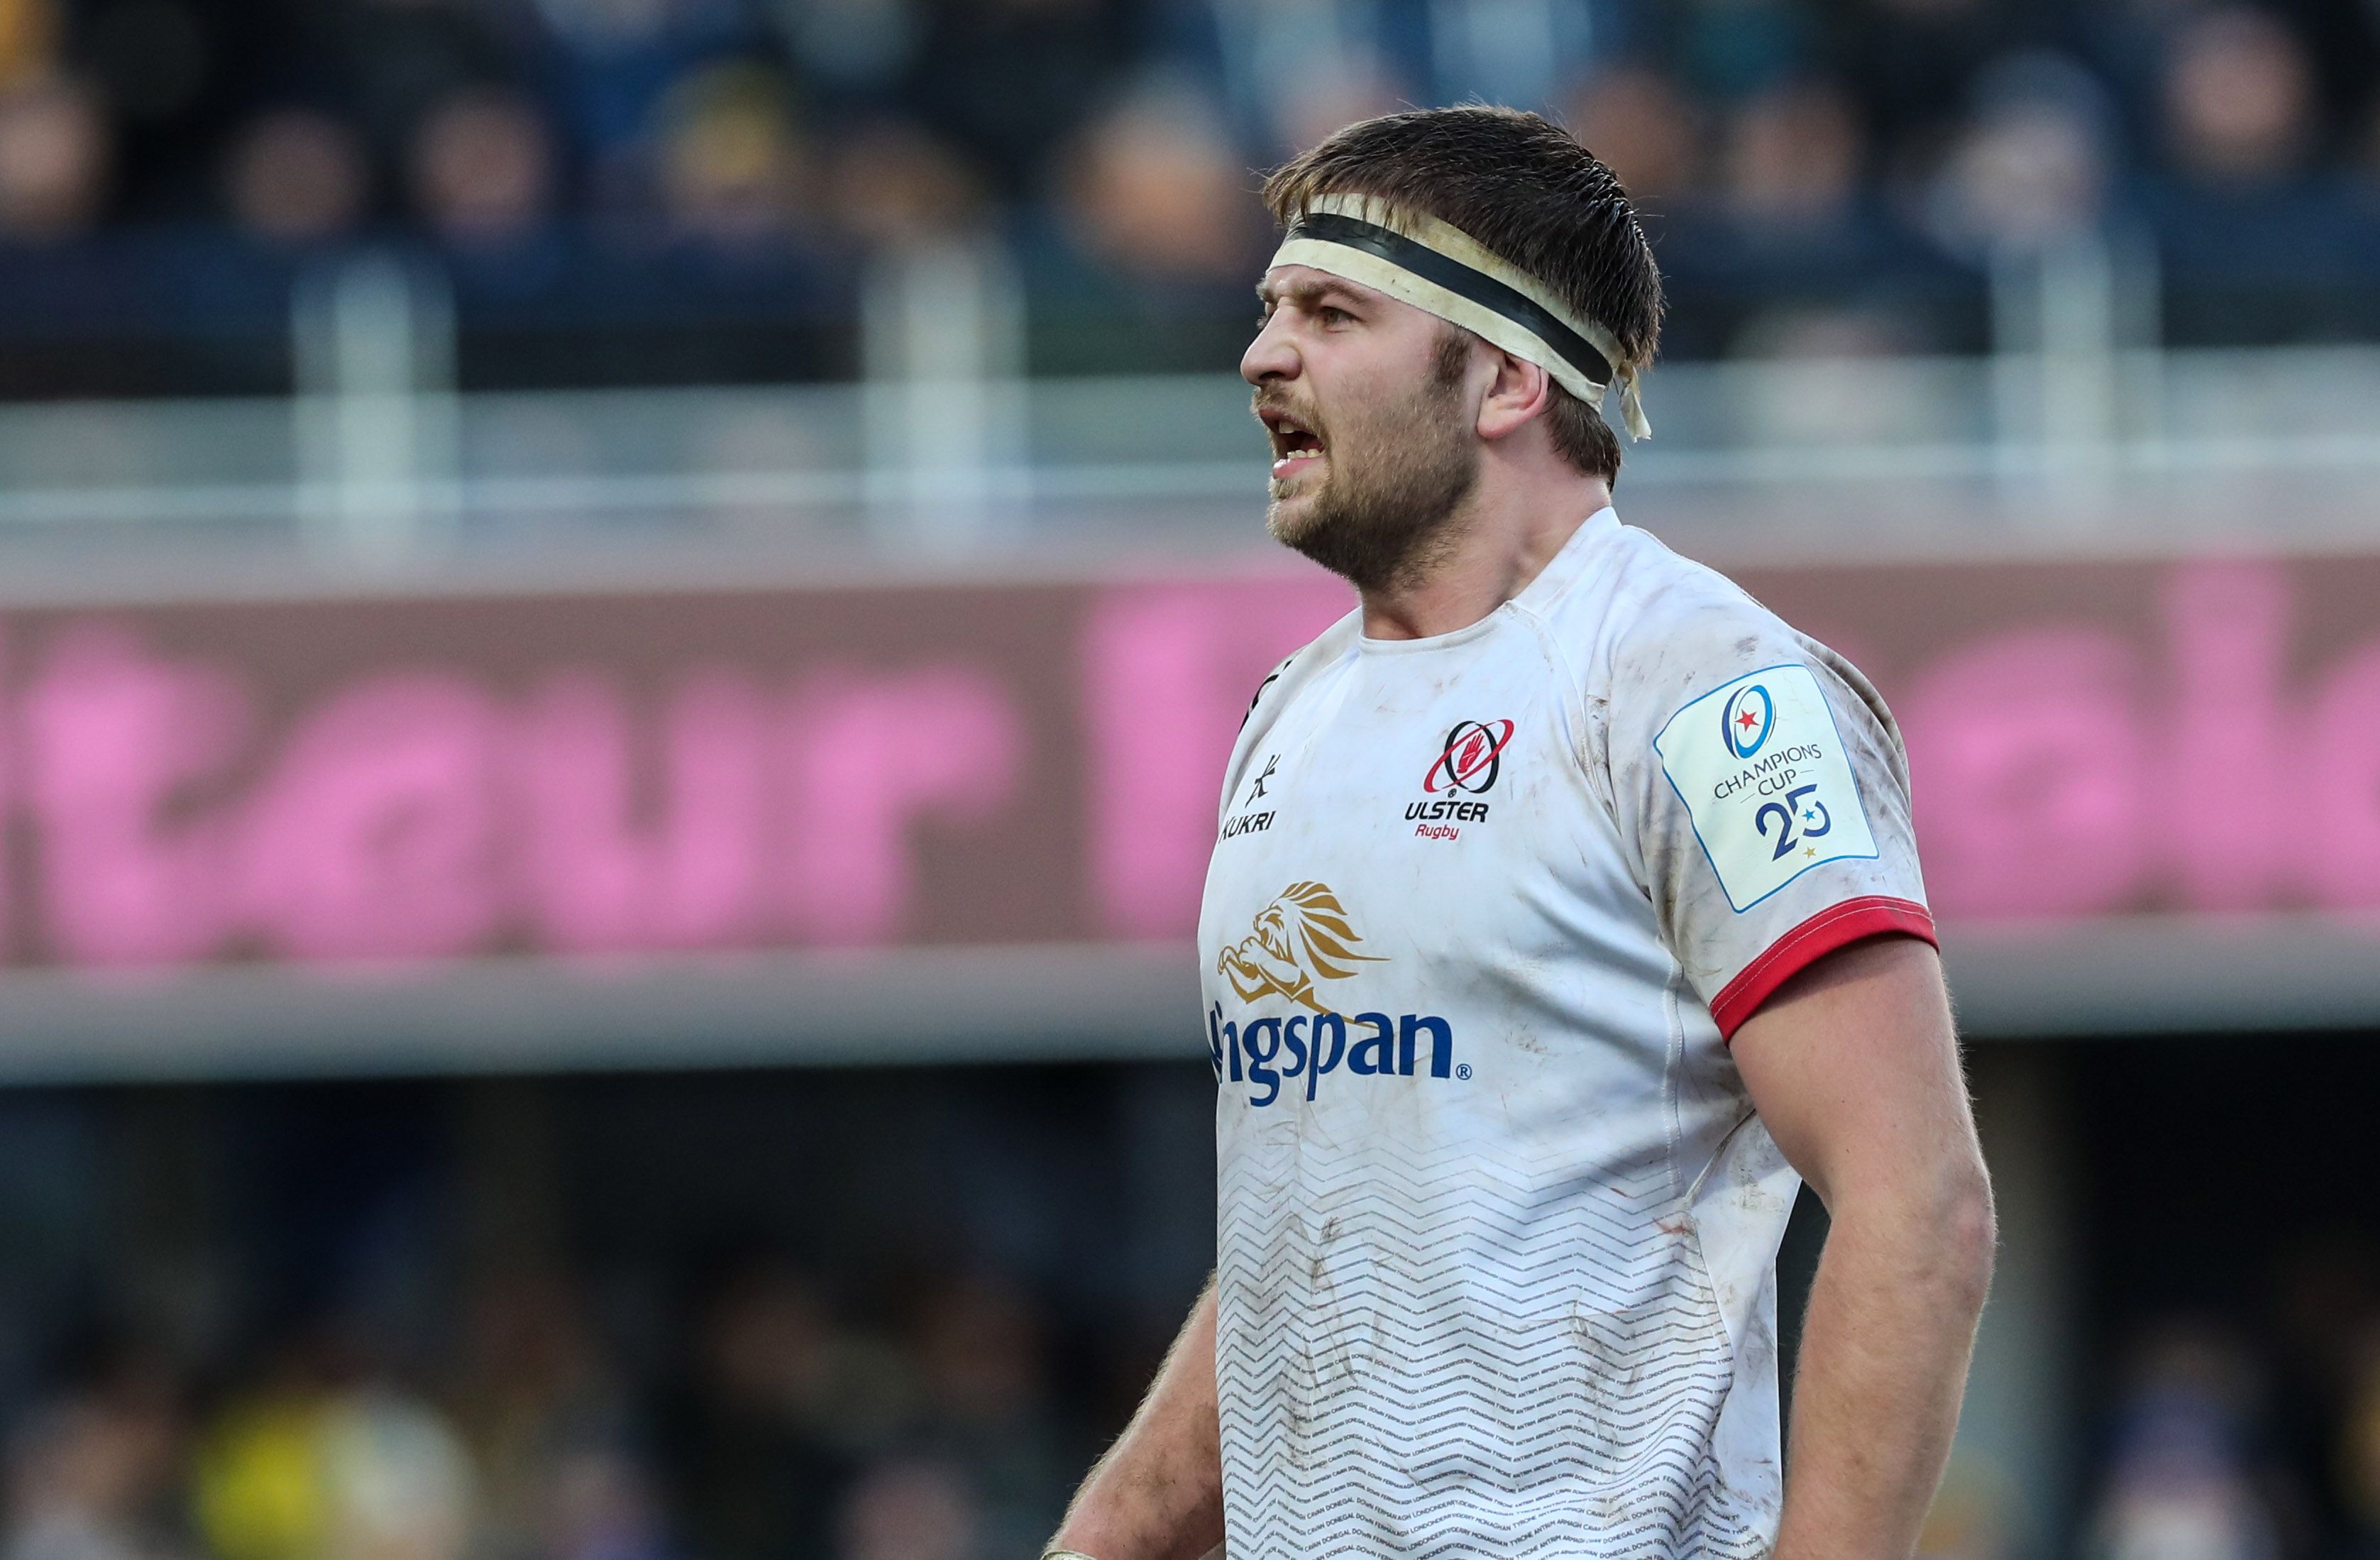 Ulster skipper captain Iain Henderson has recovered from a shoulder injury to come into the starting line-up for tonight’s Rainbow Cup opener against Connacht at the Kingspan Stadium 